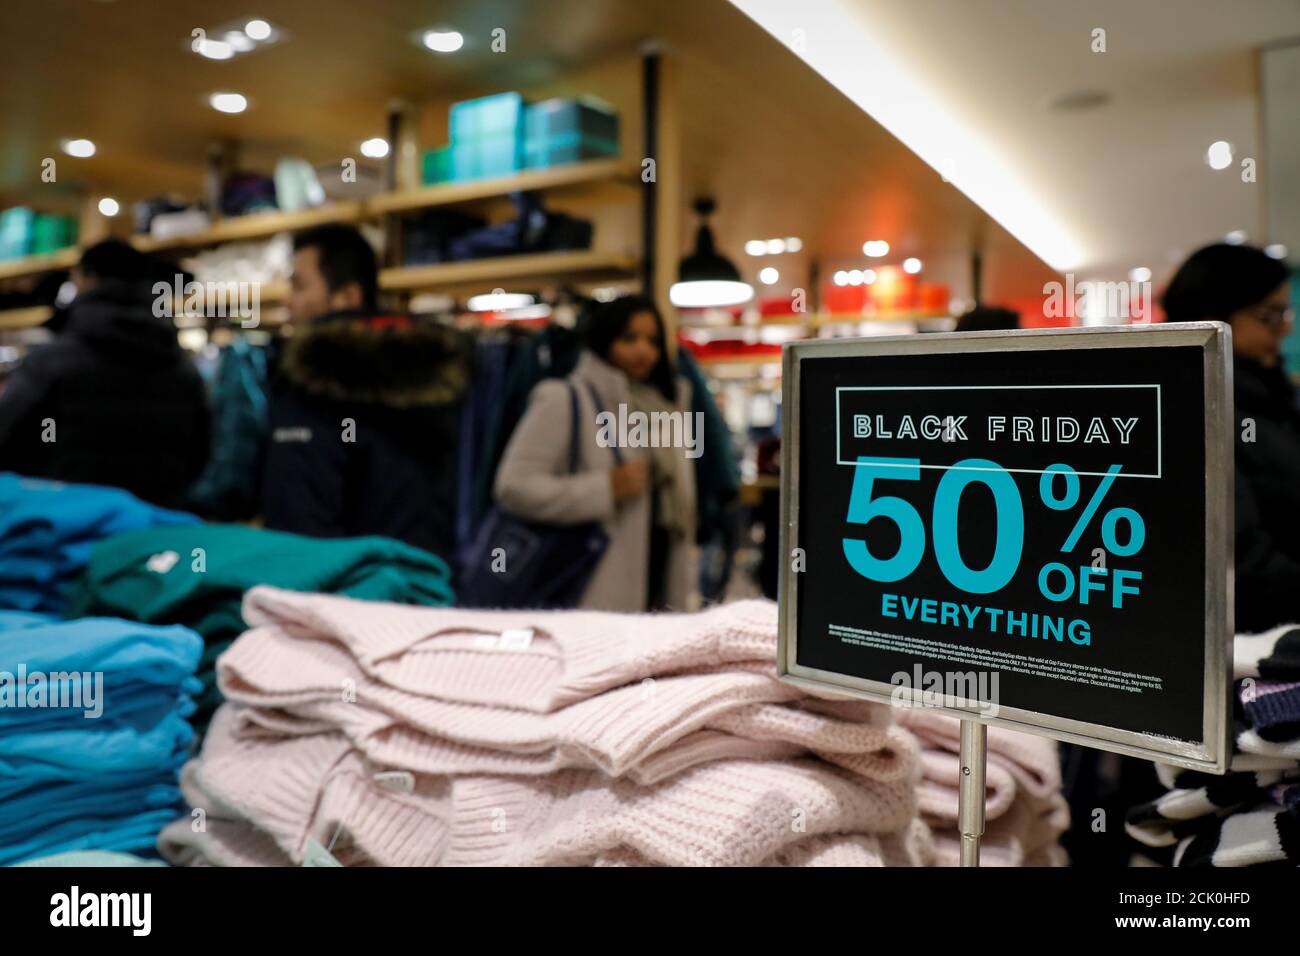 Holiday shoppers take part in early Black Friday shopping deals at the Gap  store on the